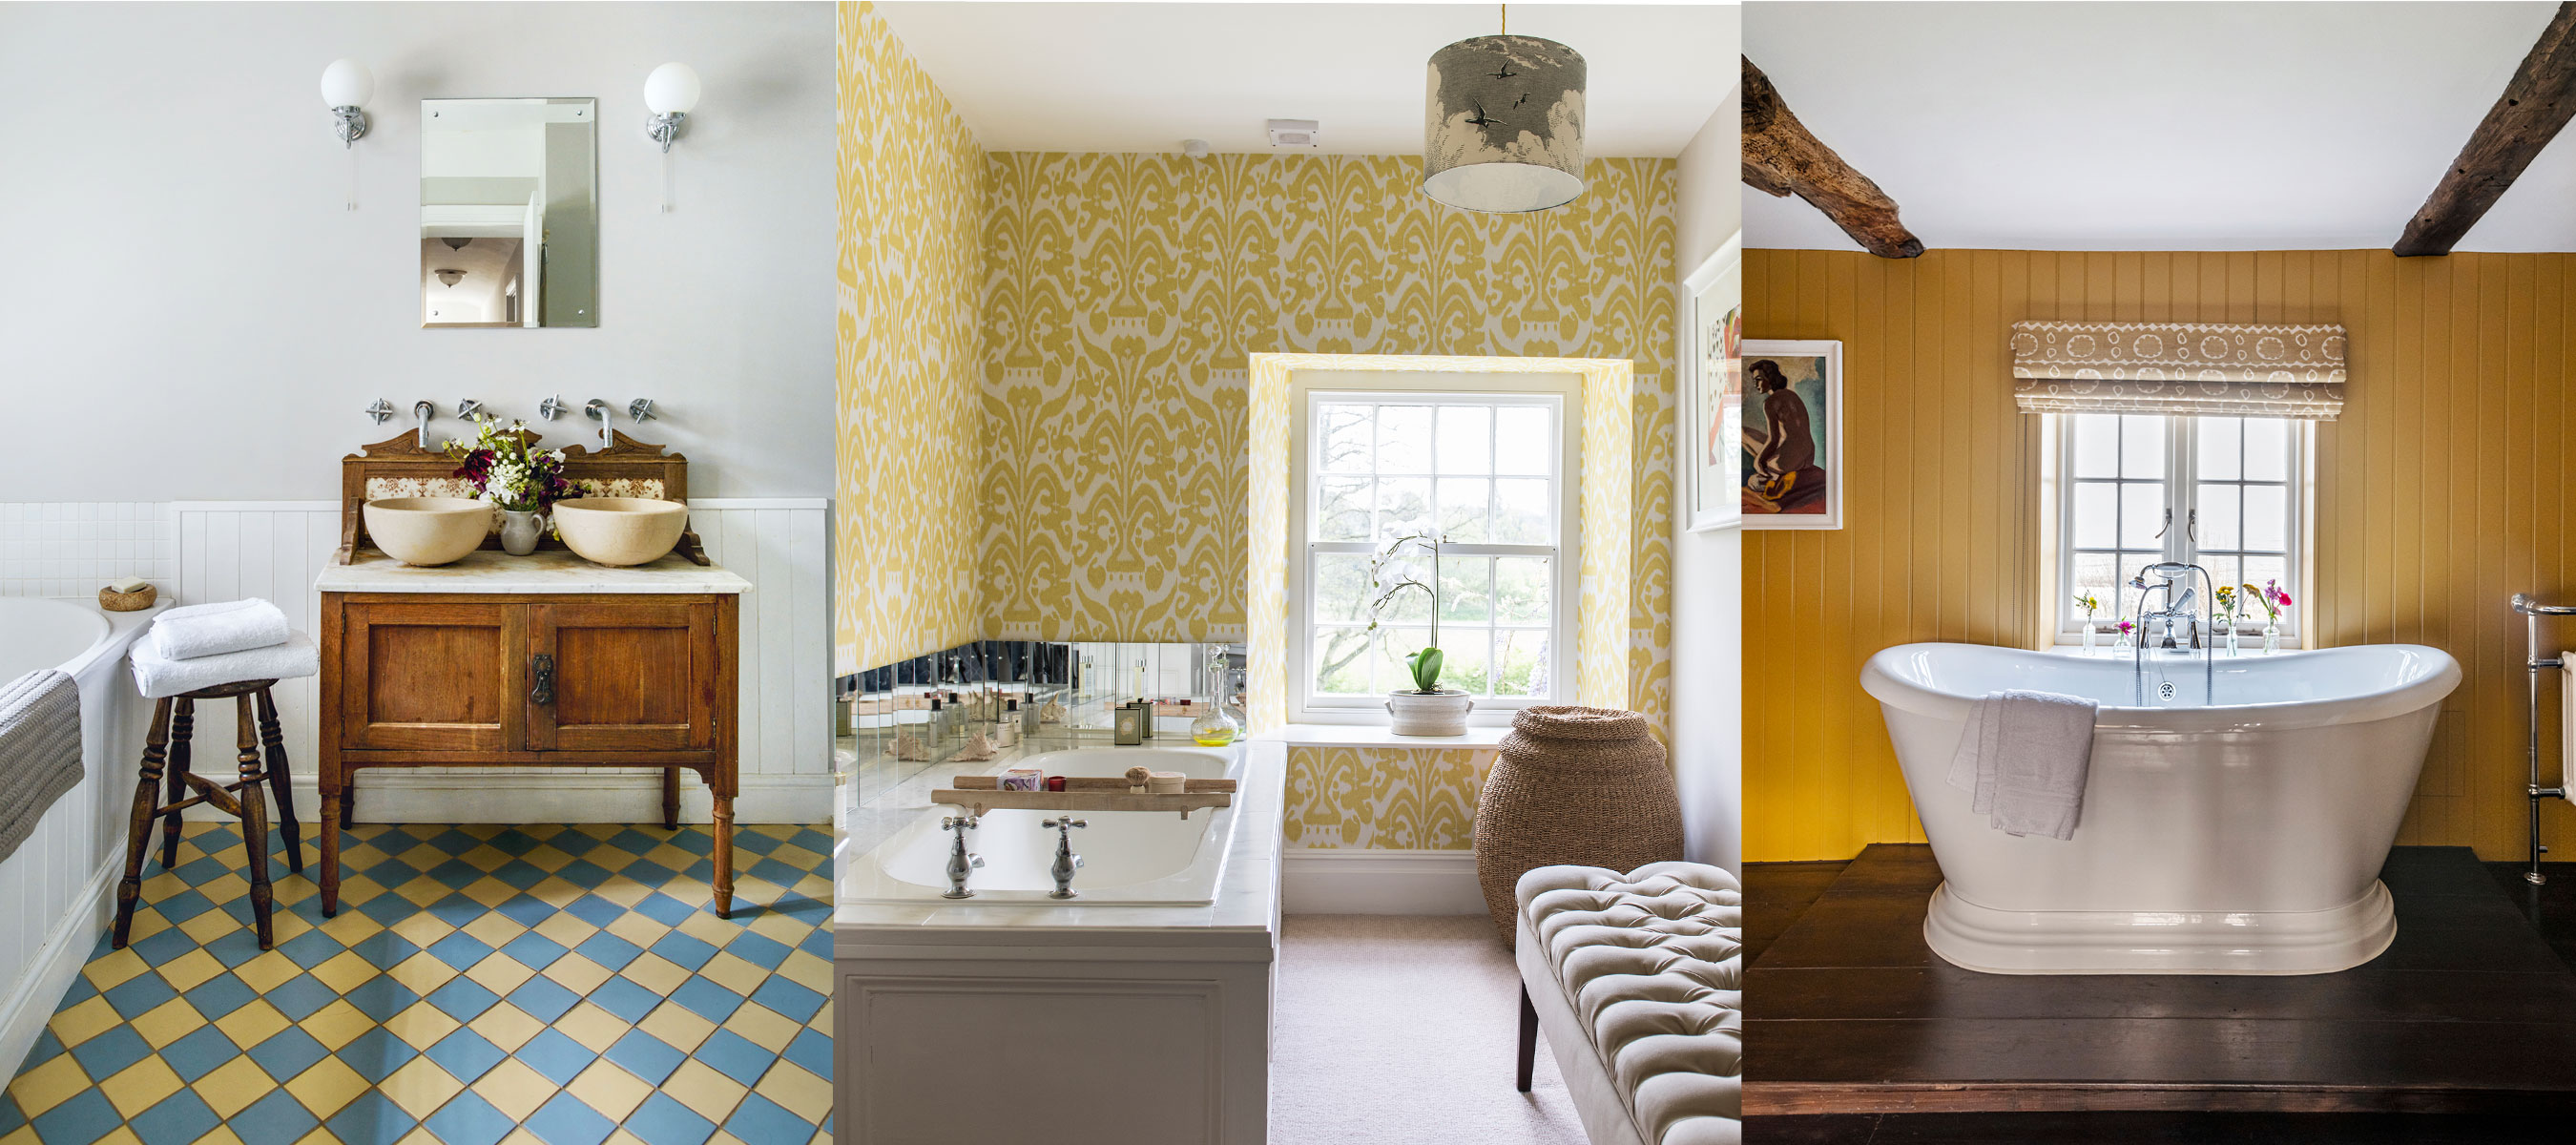 Mustard yellow: how to use it in your kitchen, bedroom and bathroom